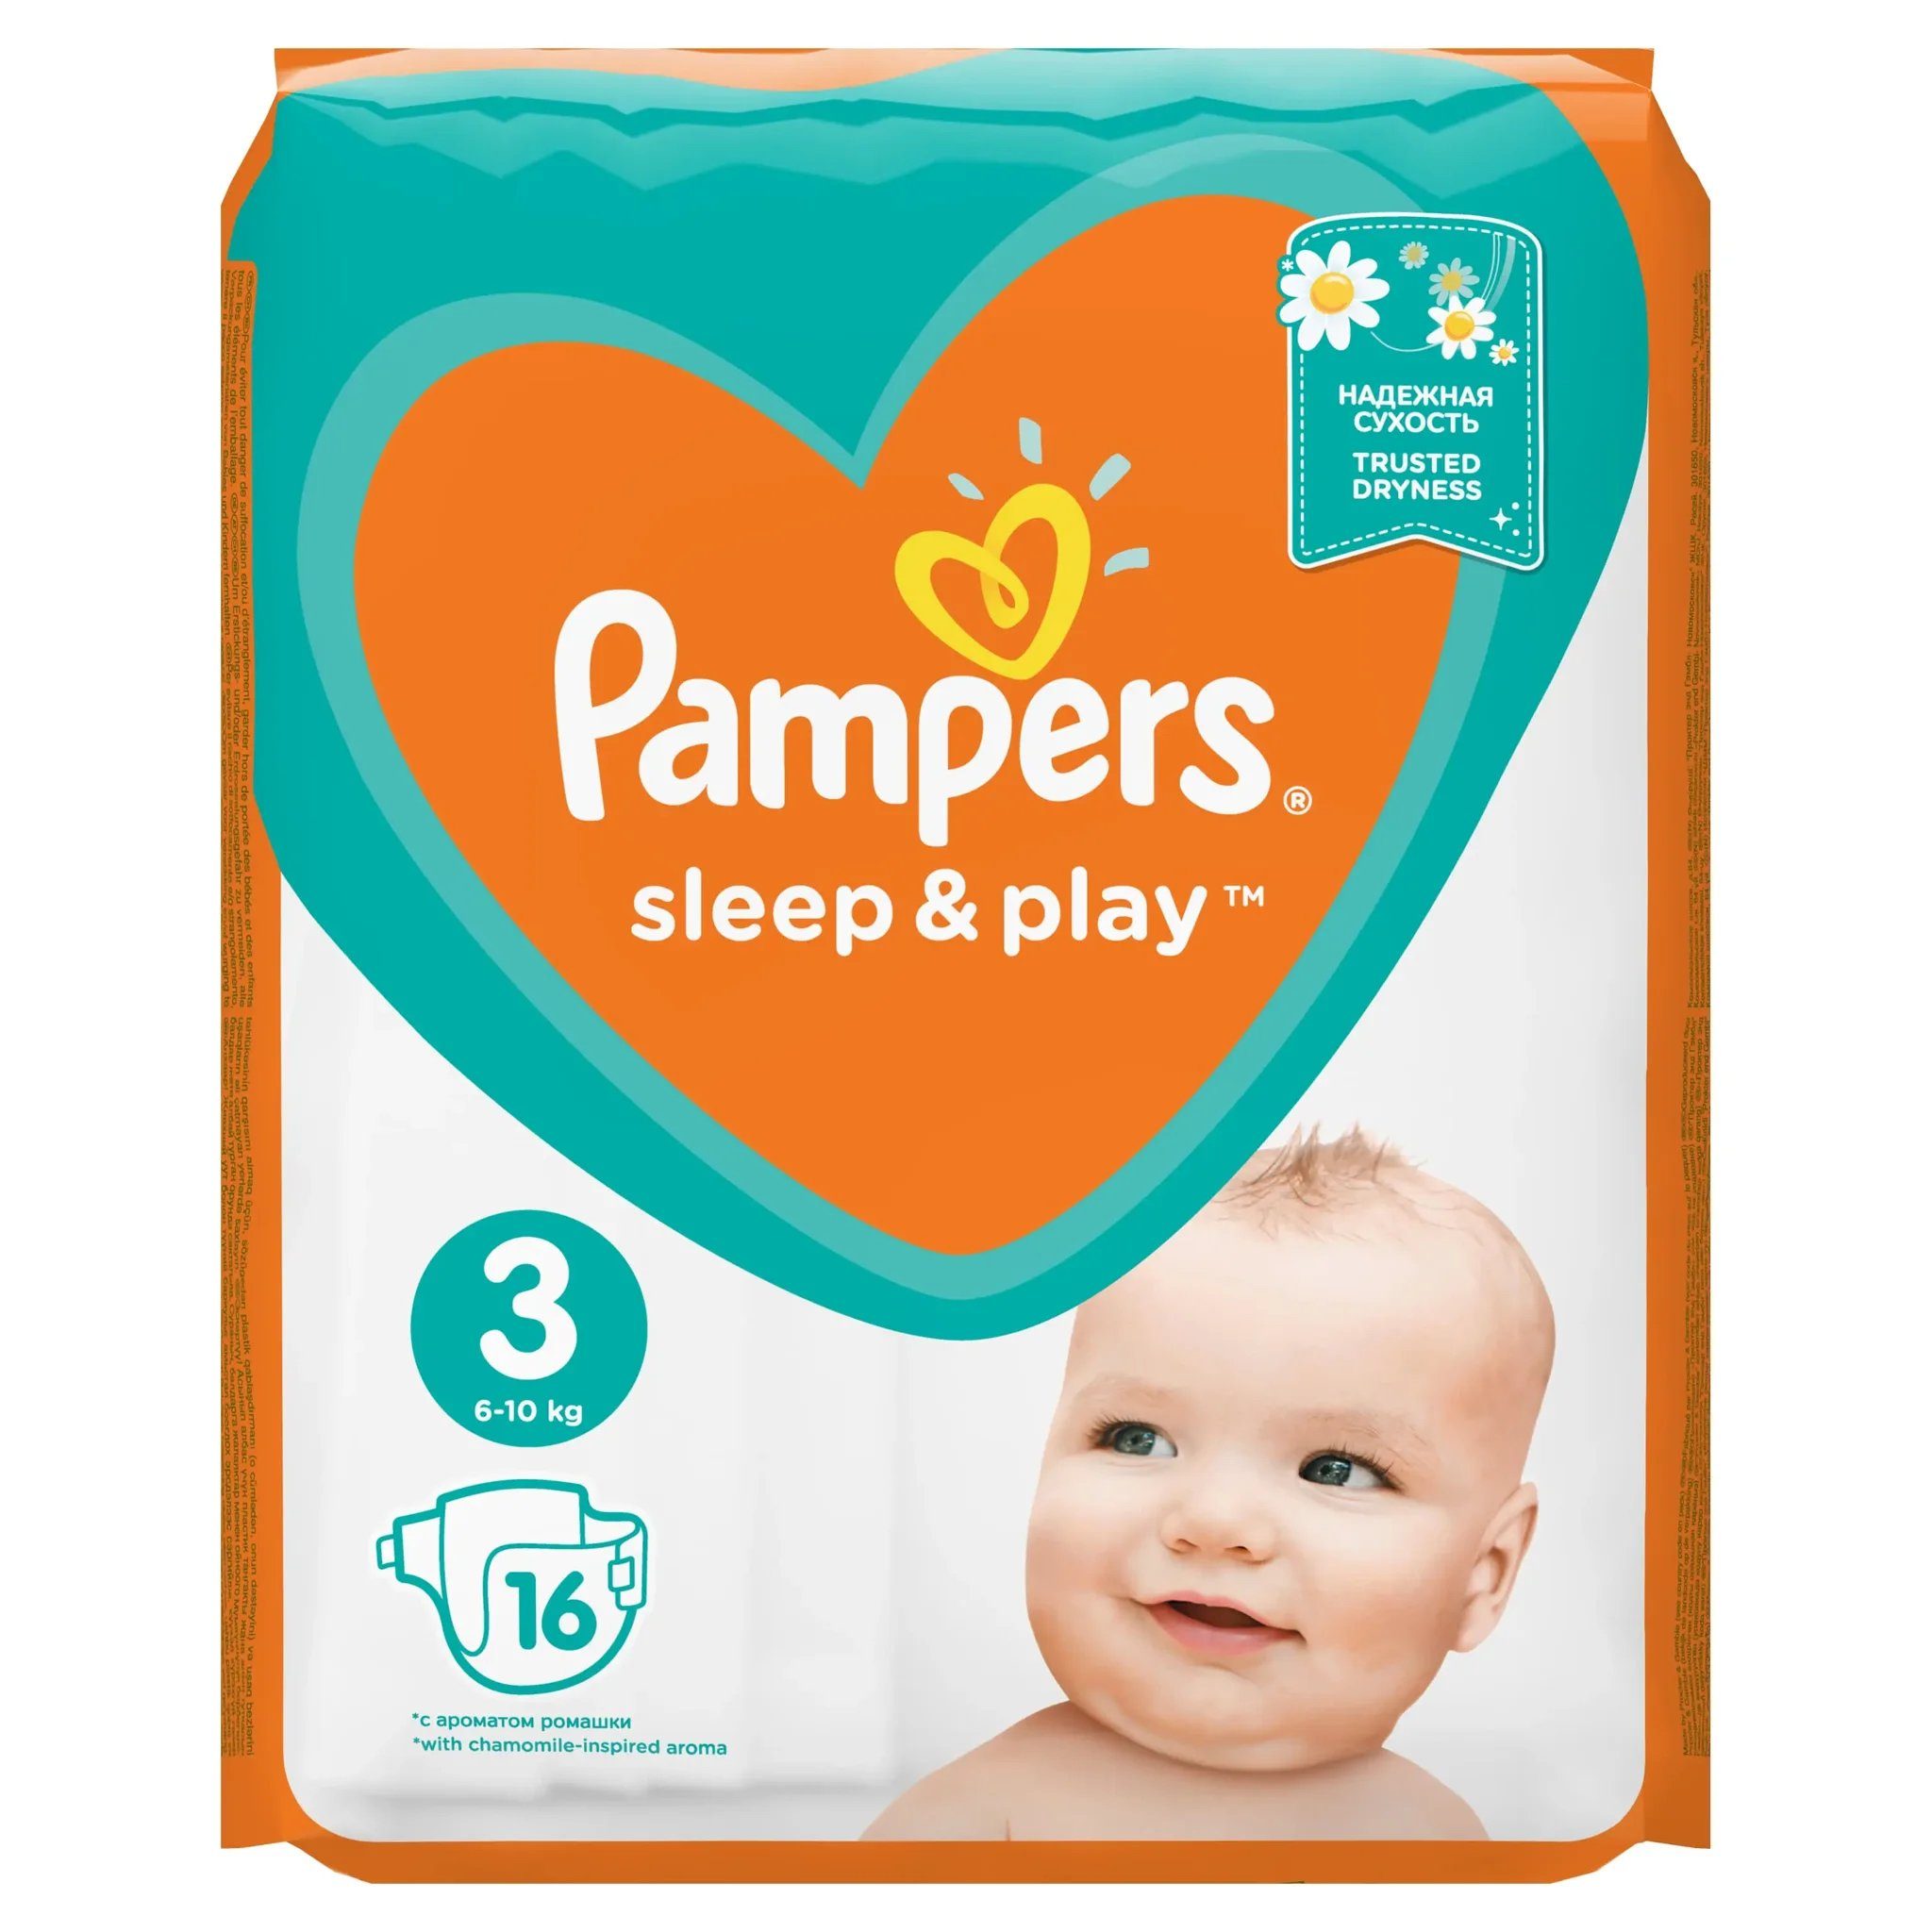 Pampers Windeln Sleep & Play, Alter 3, 6-10kg (3-St)